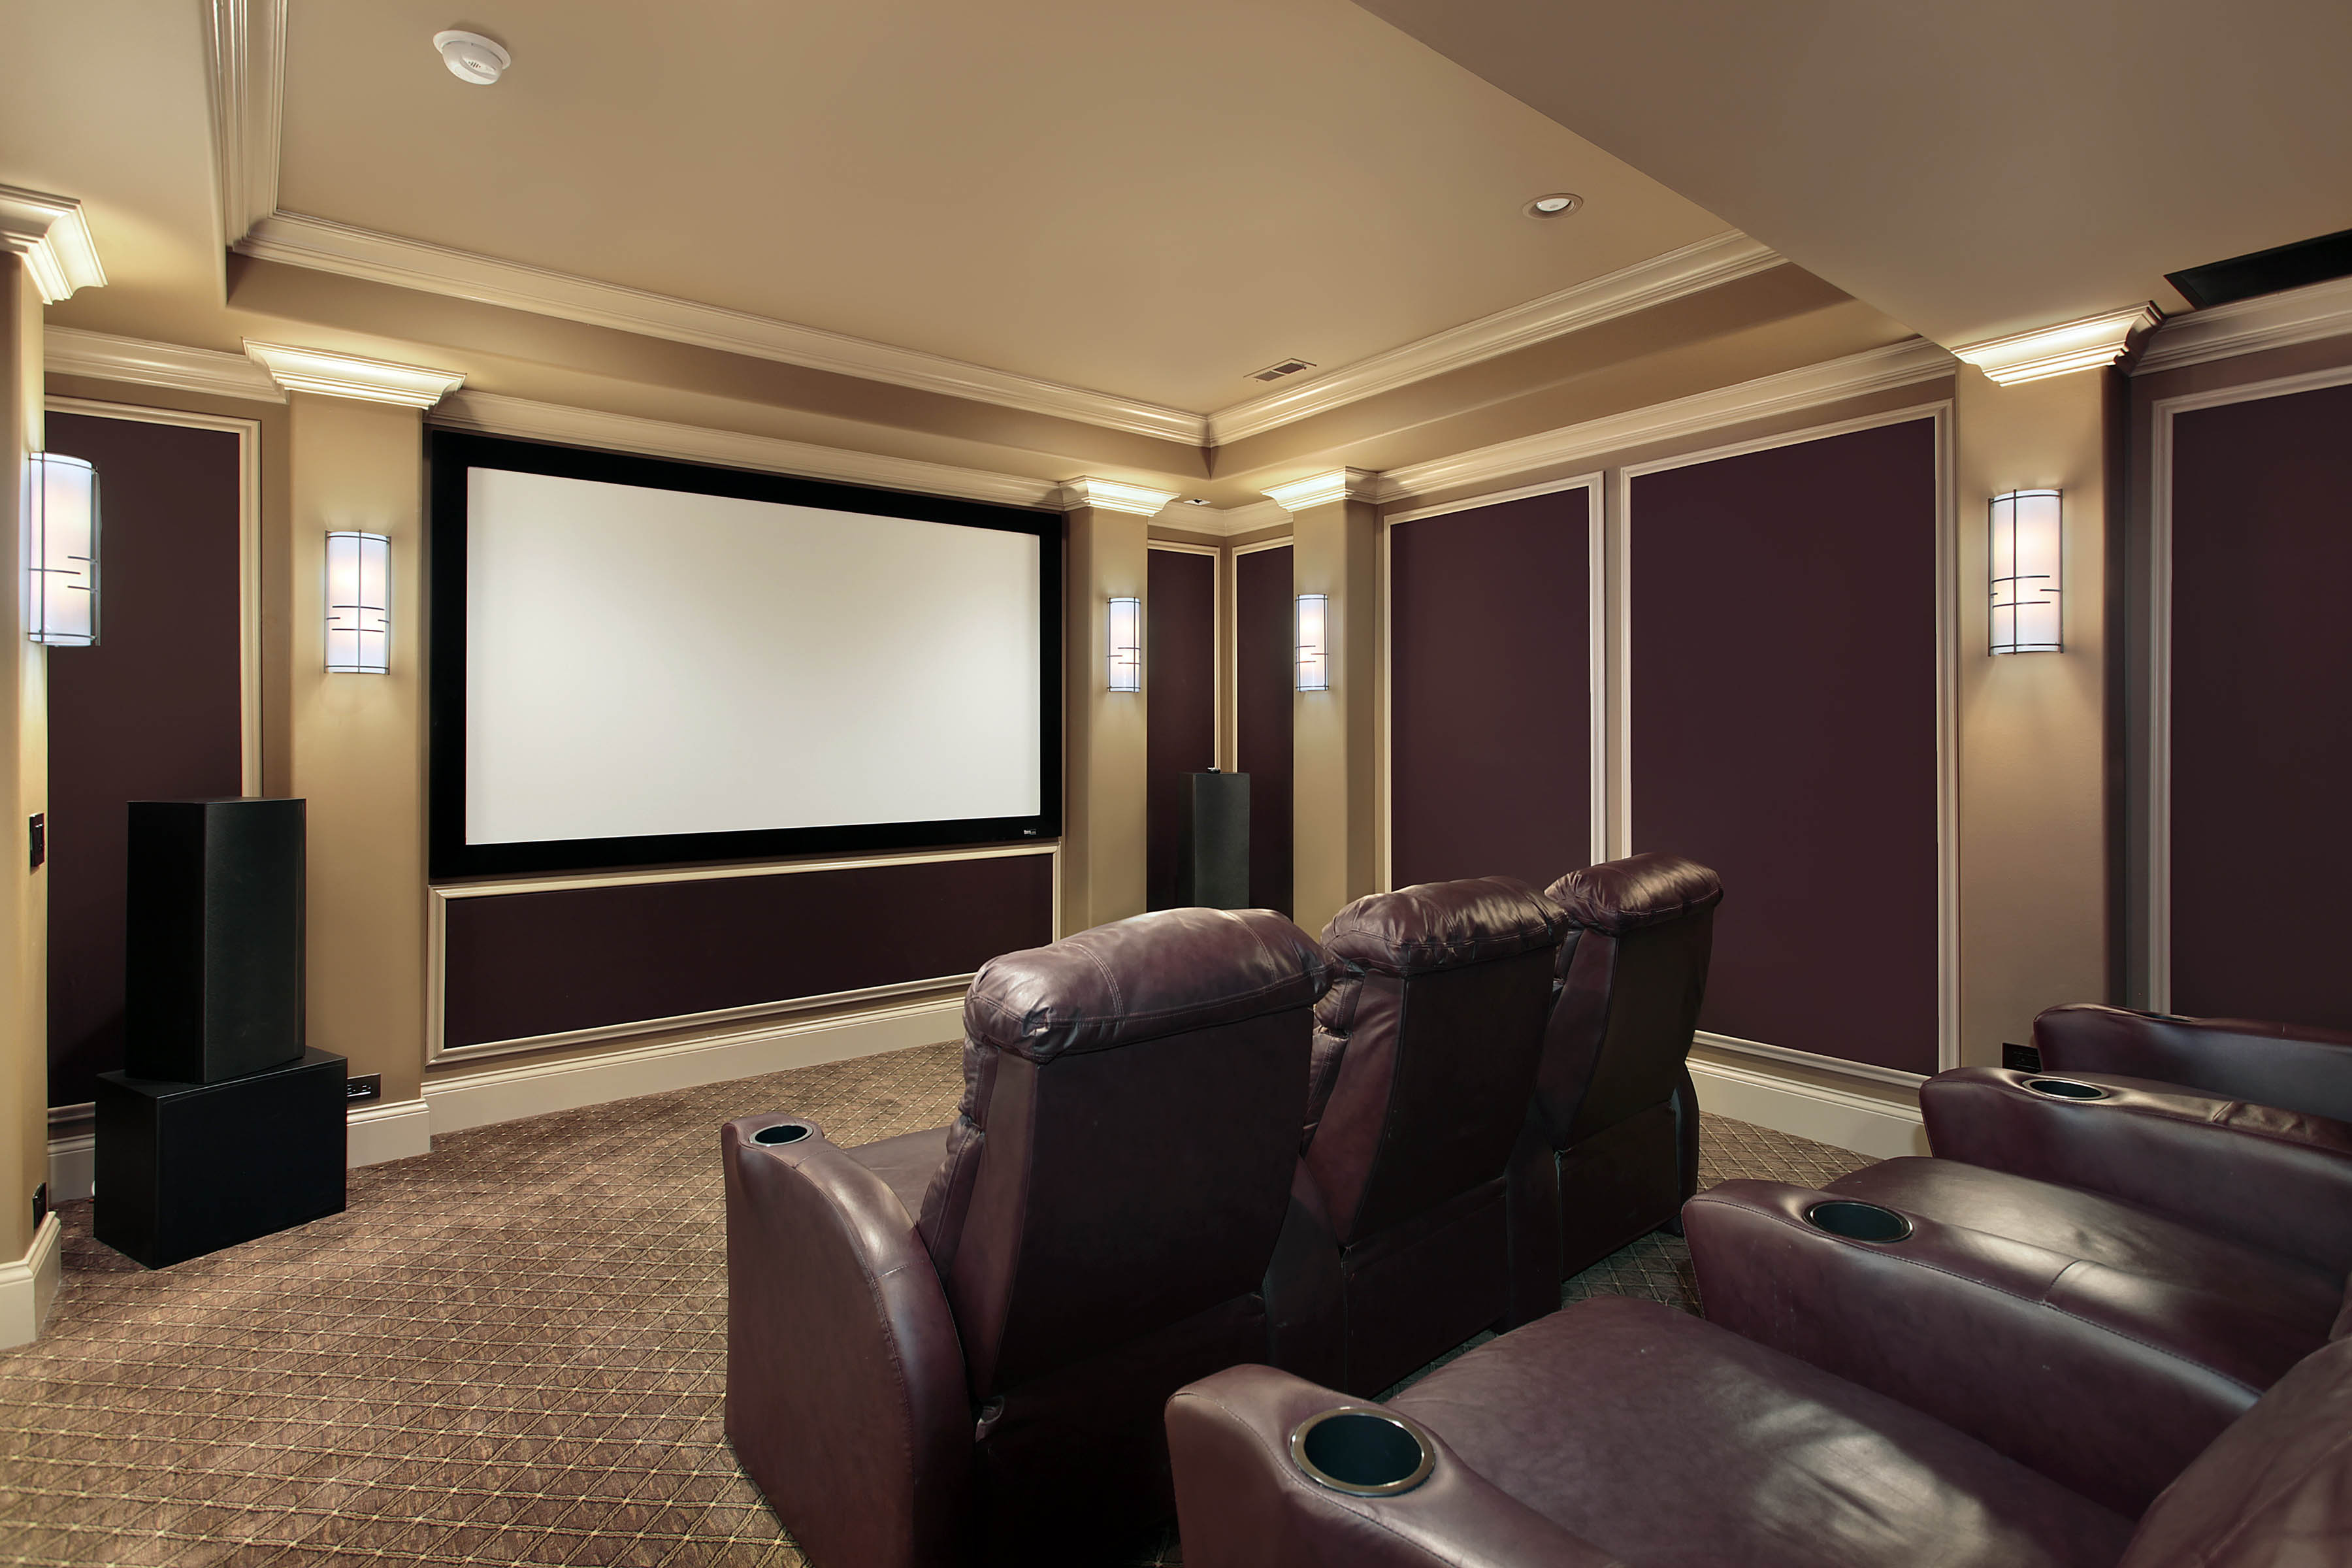 Projection Range, Projector Screen Paint & Wallpapers Products